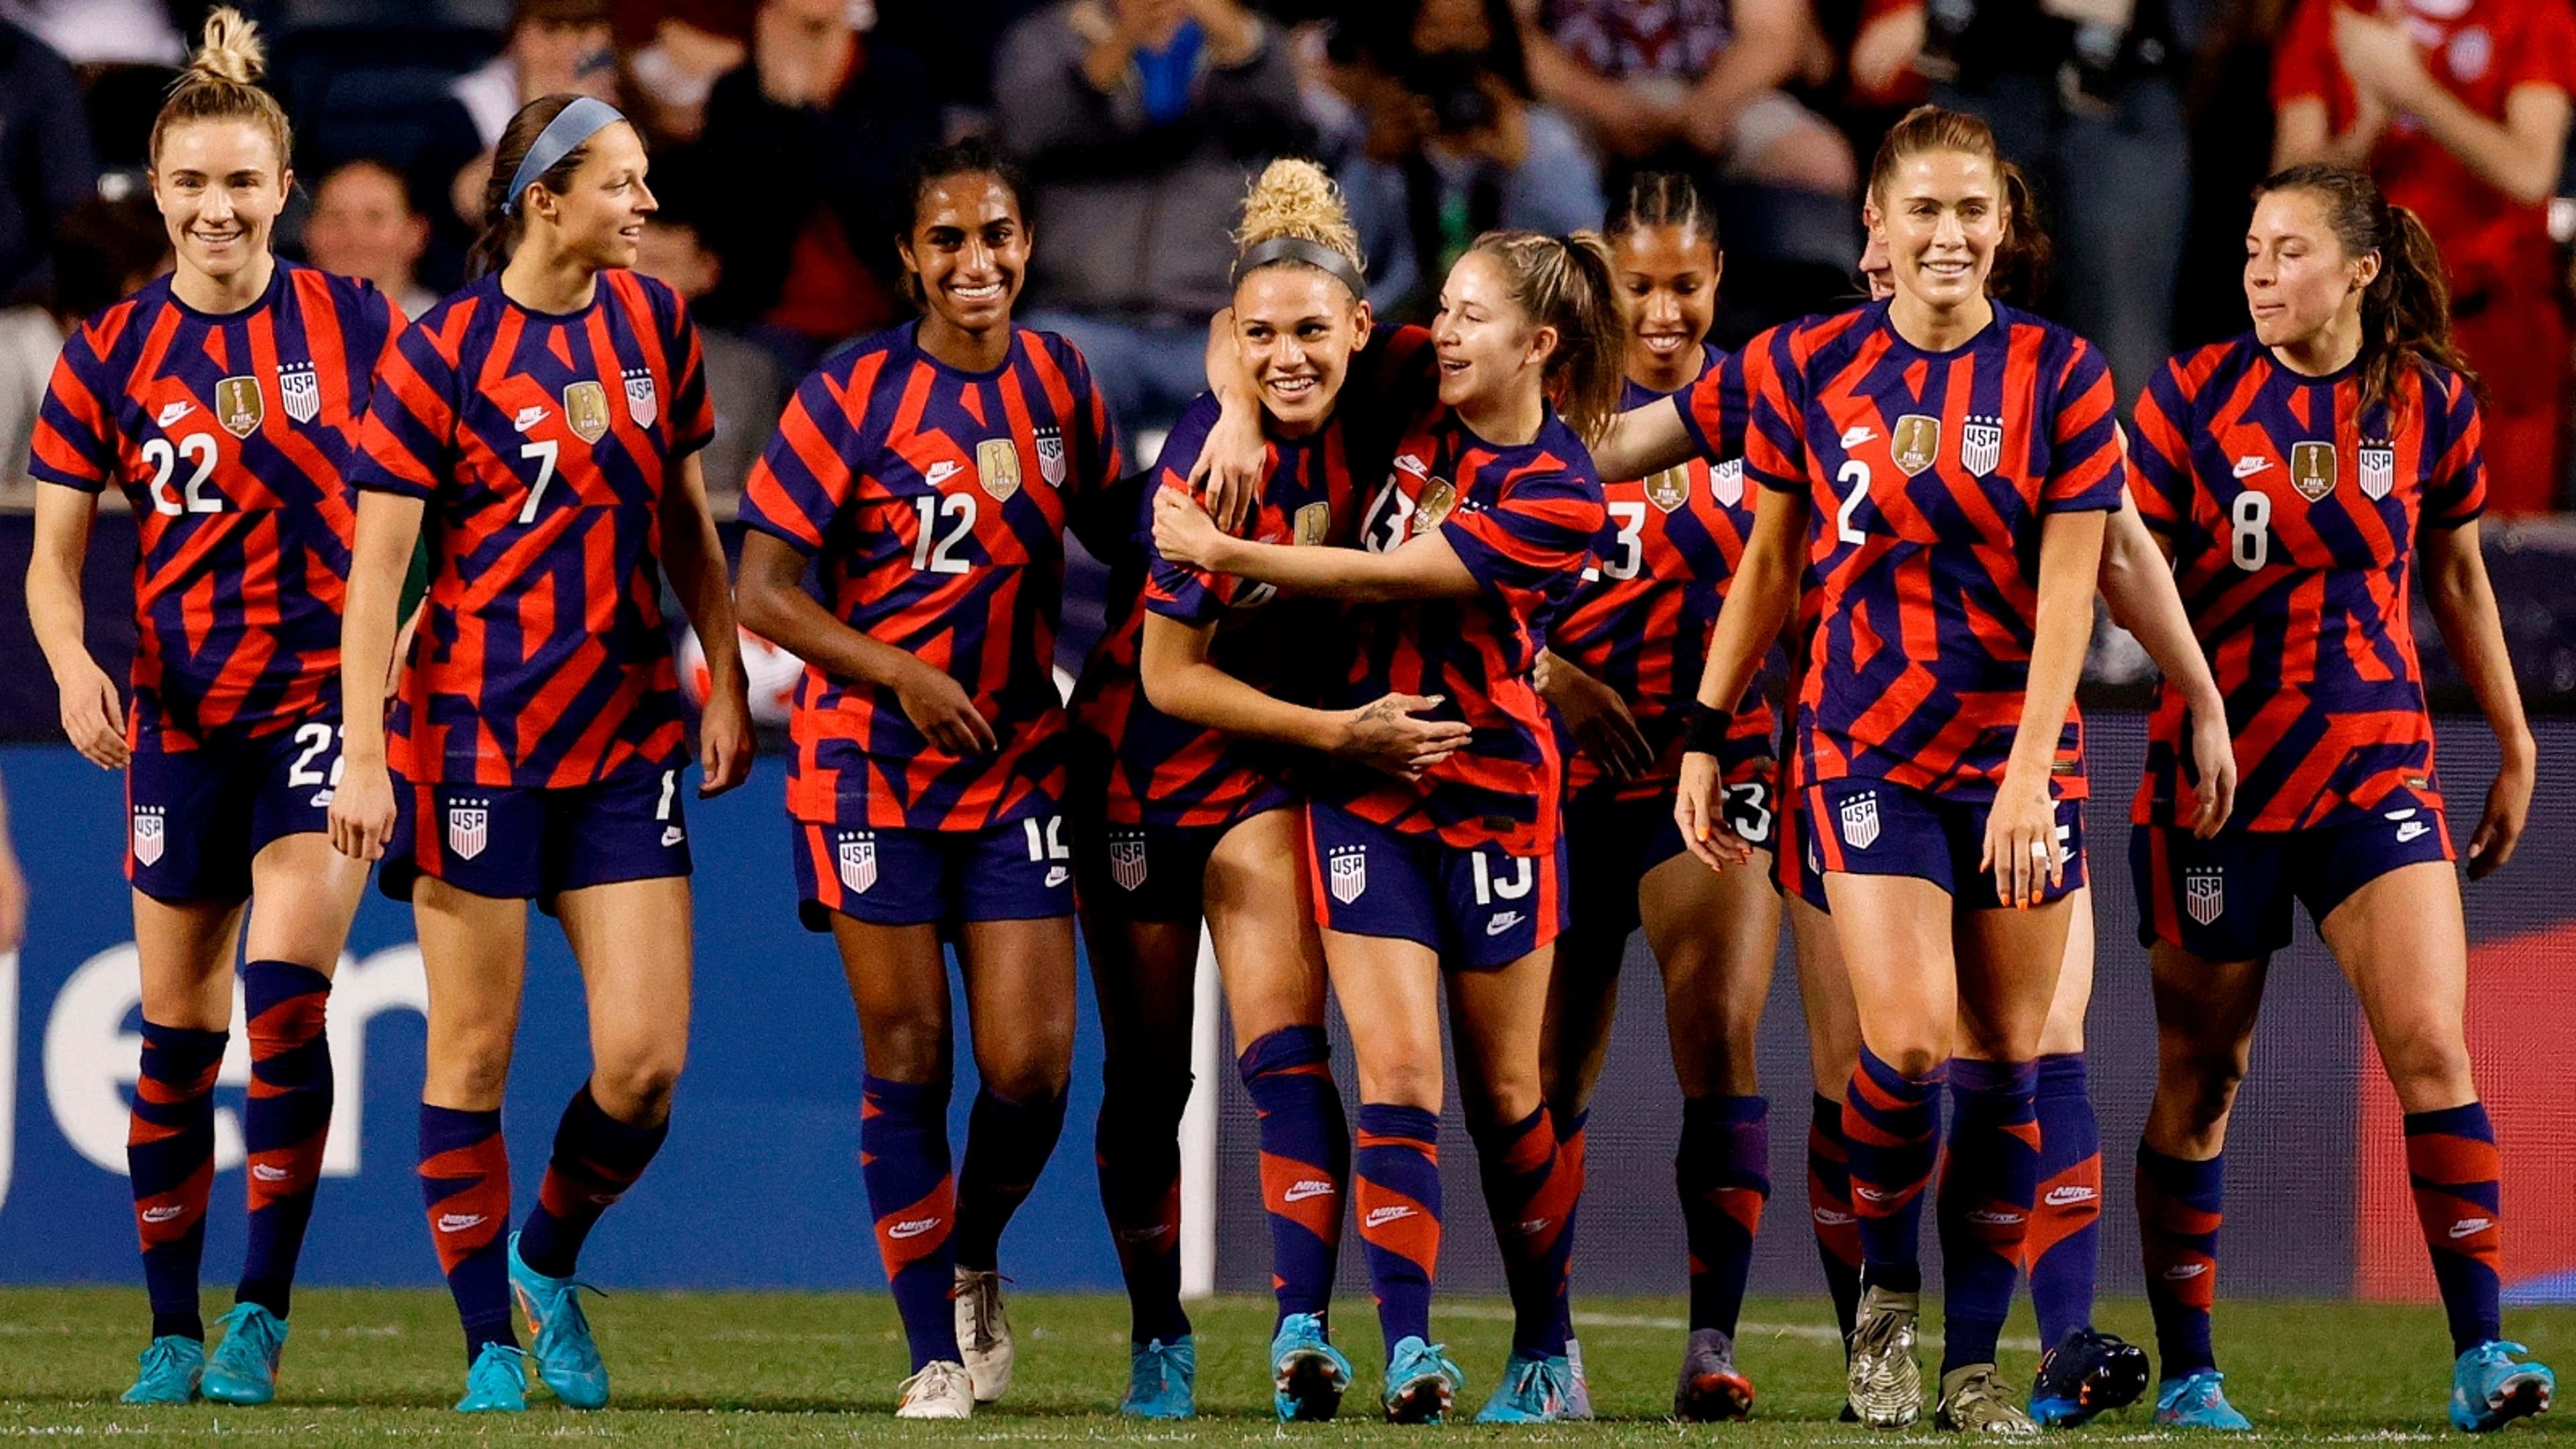 The U.S. men's and women's soccer teams will be paid equally under